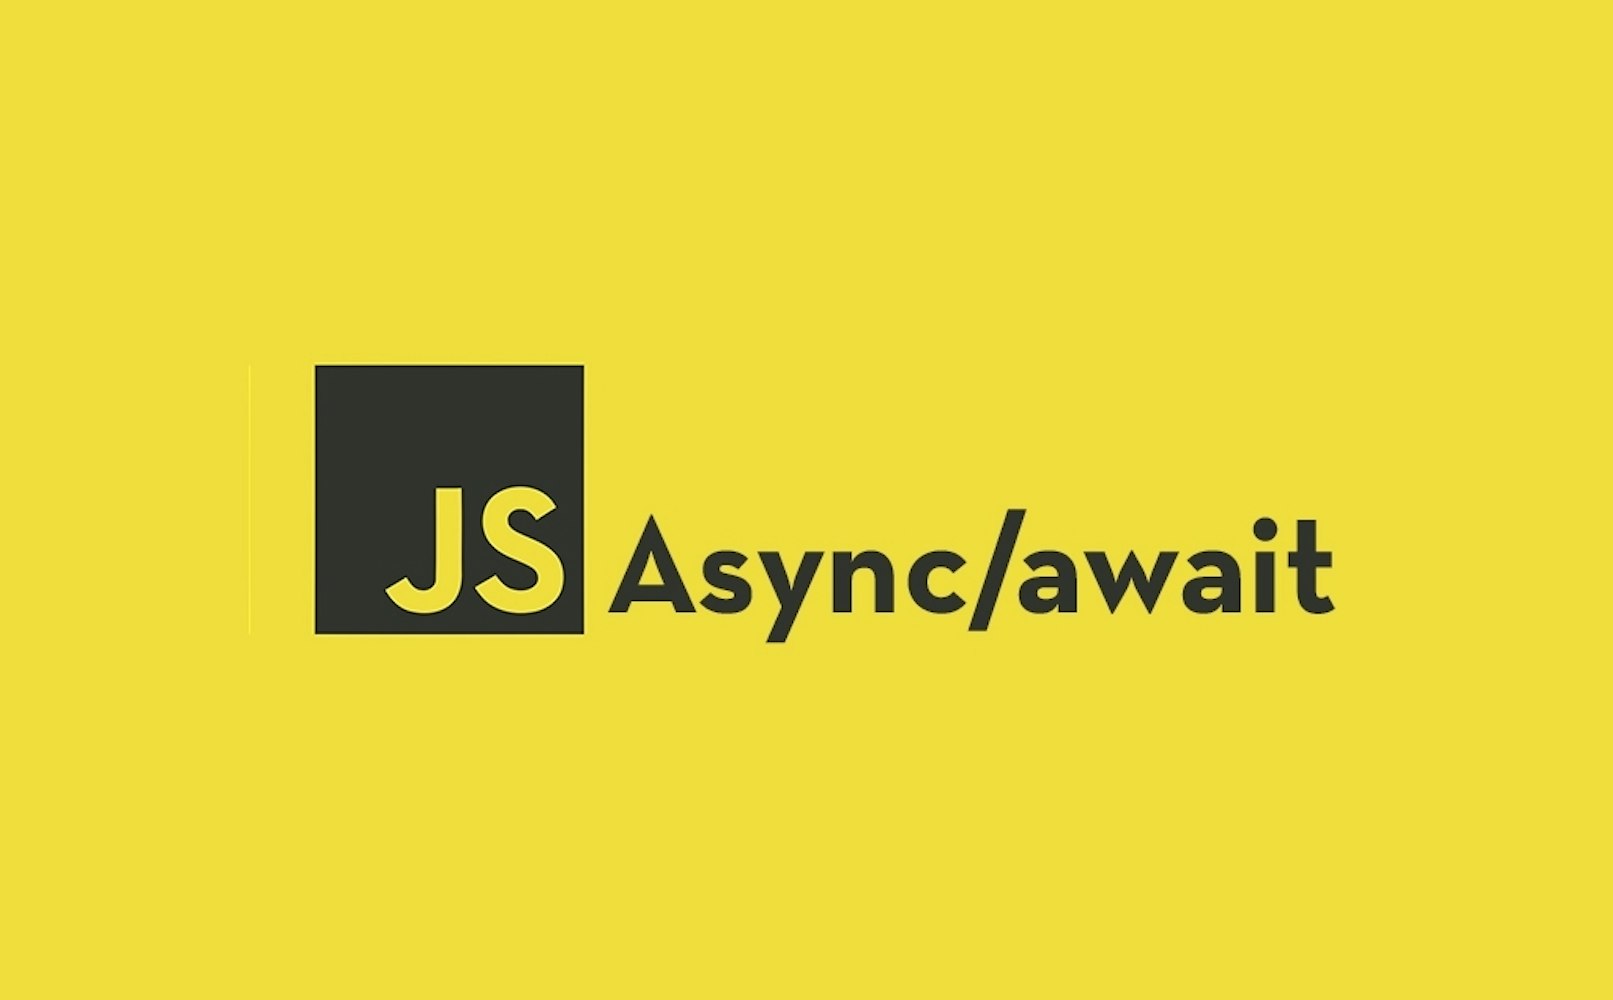 Cover Image for Async JavaScript in an easier way to understand!